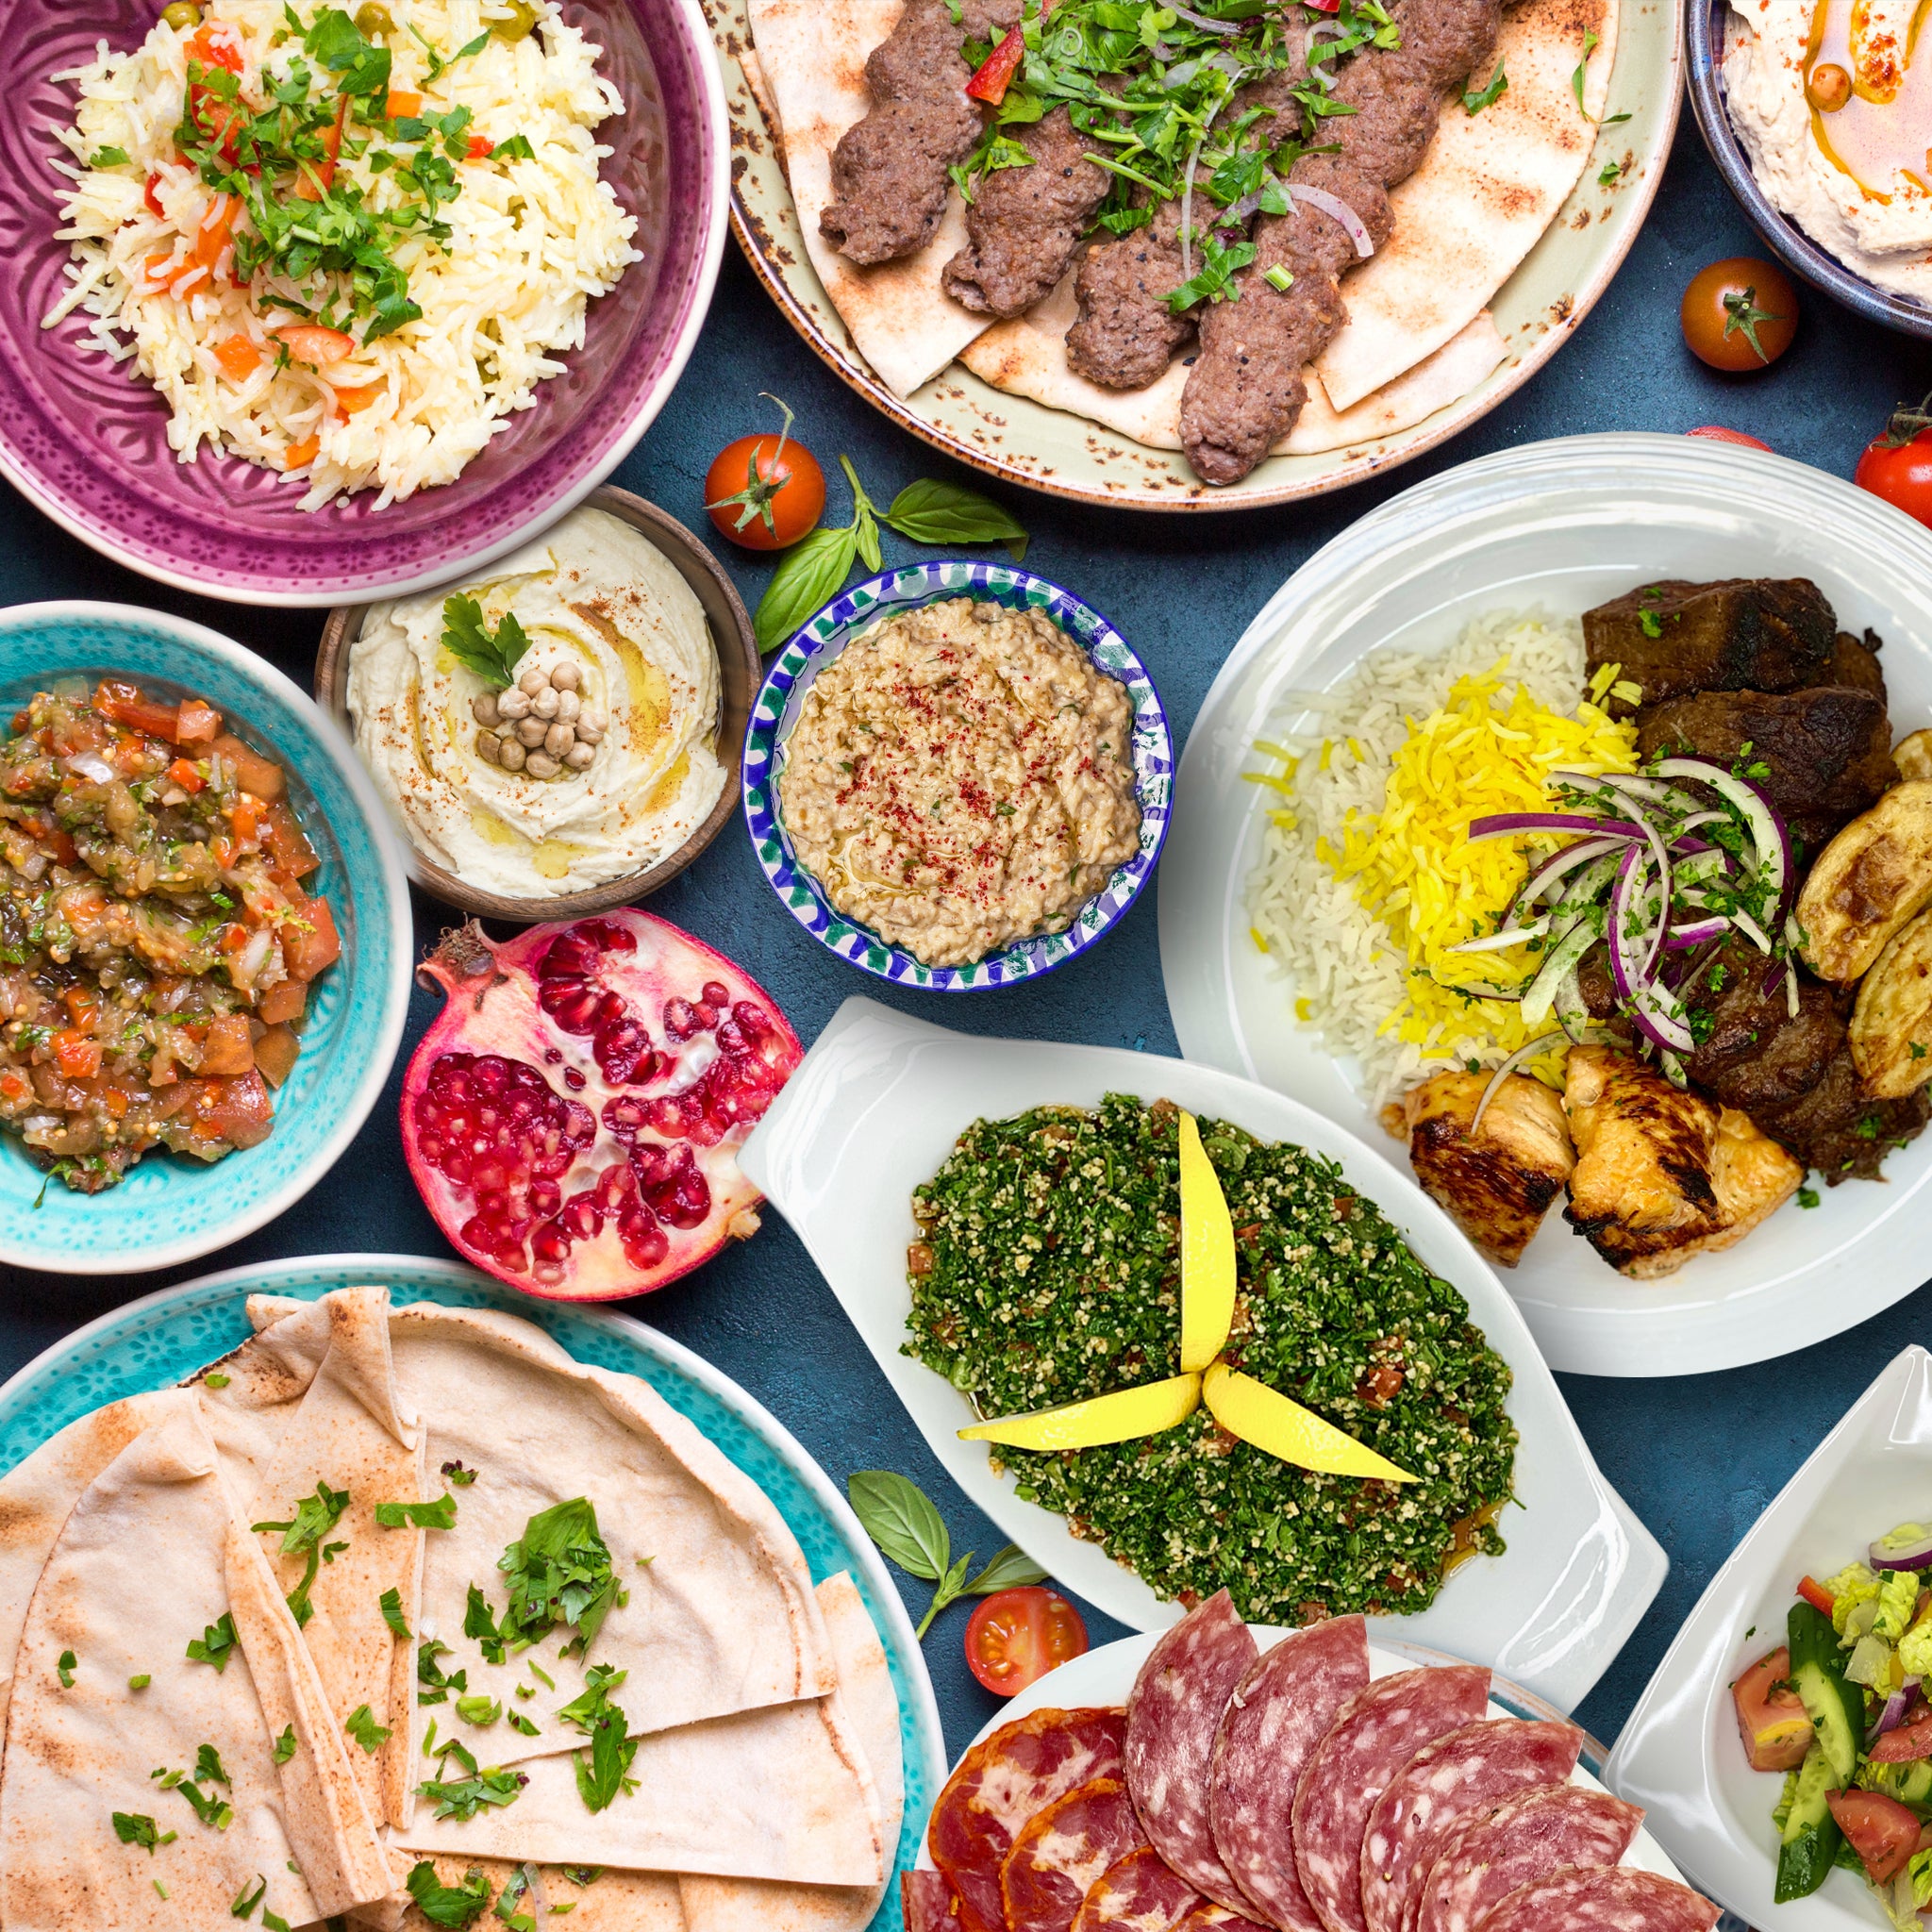 Signature Middle Eastern Dinner Catering Package (Serves 10)